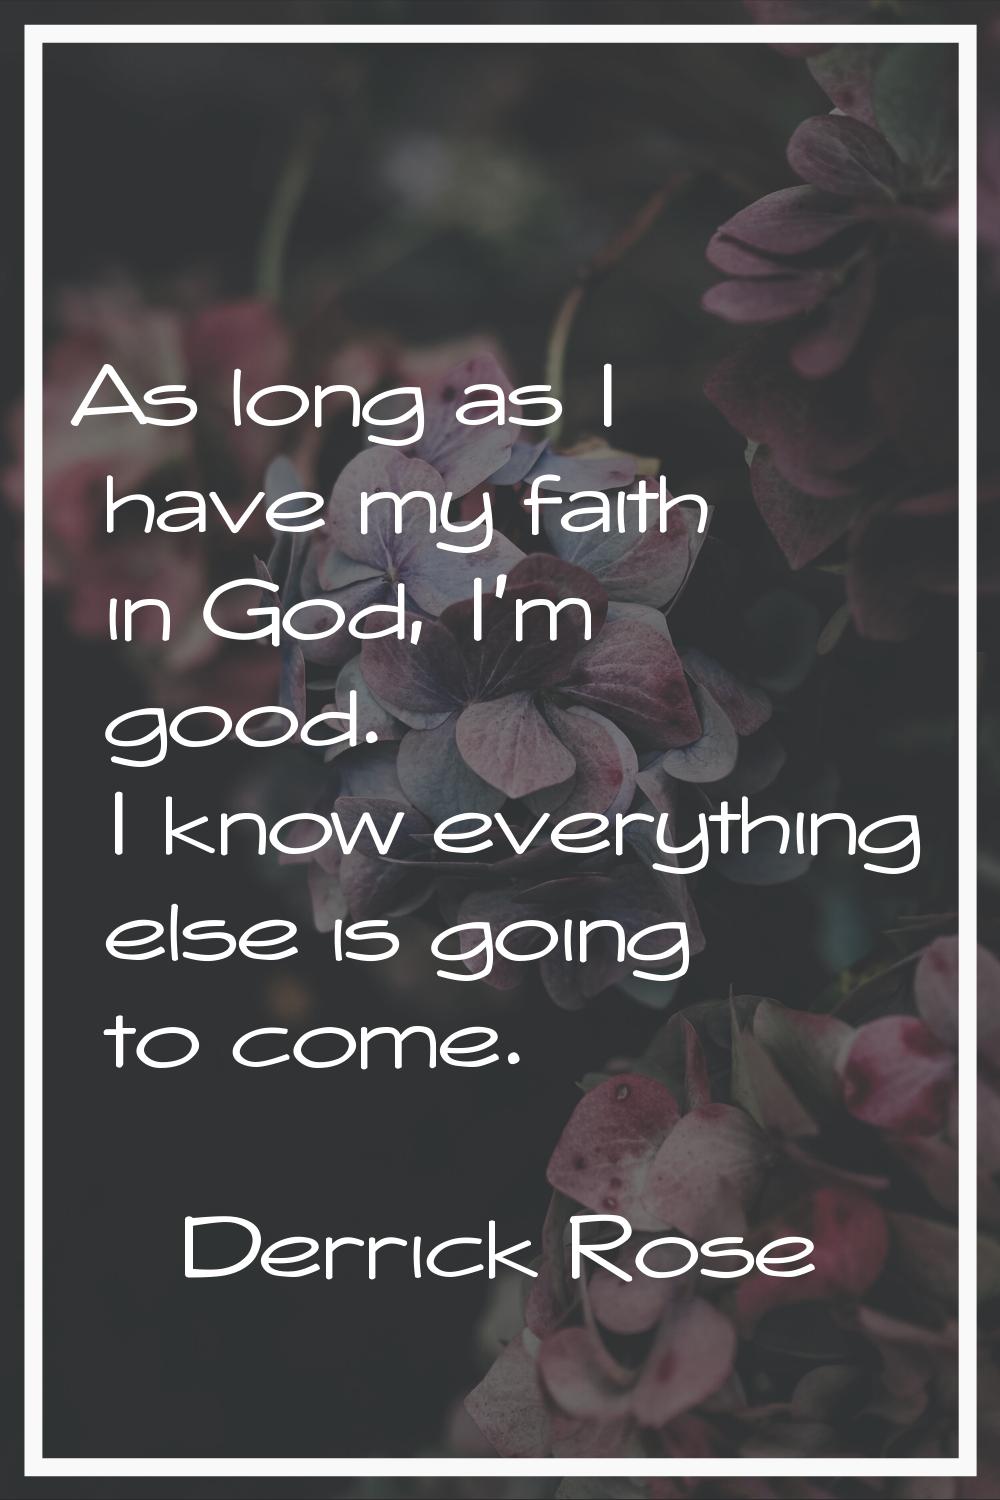 As long as I have my faith in God, I'm good. I know everything else is going to come.